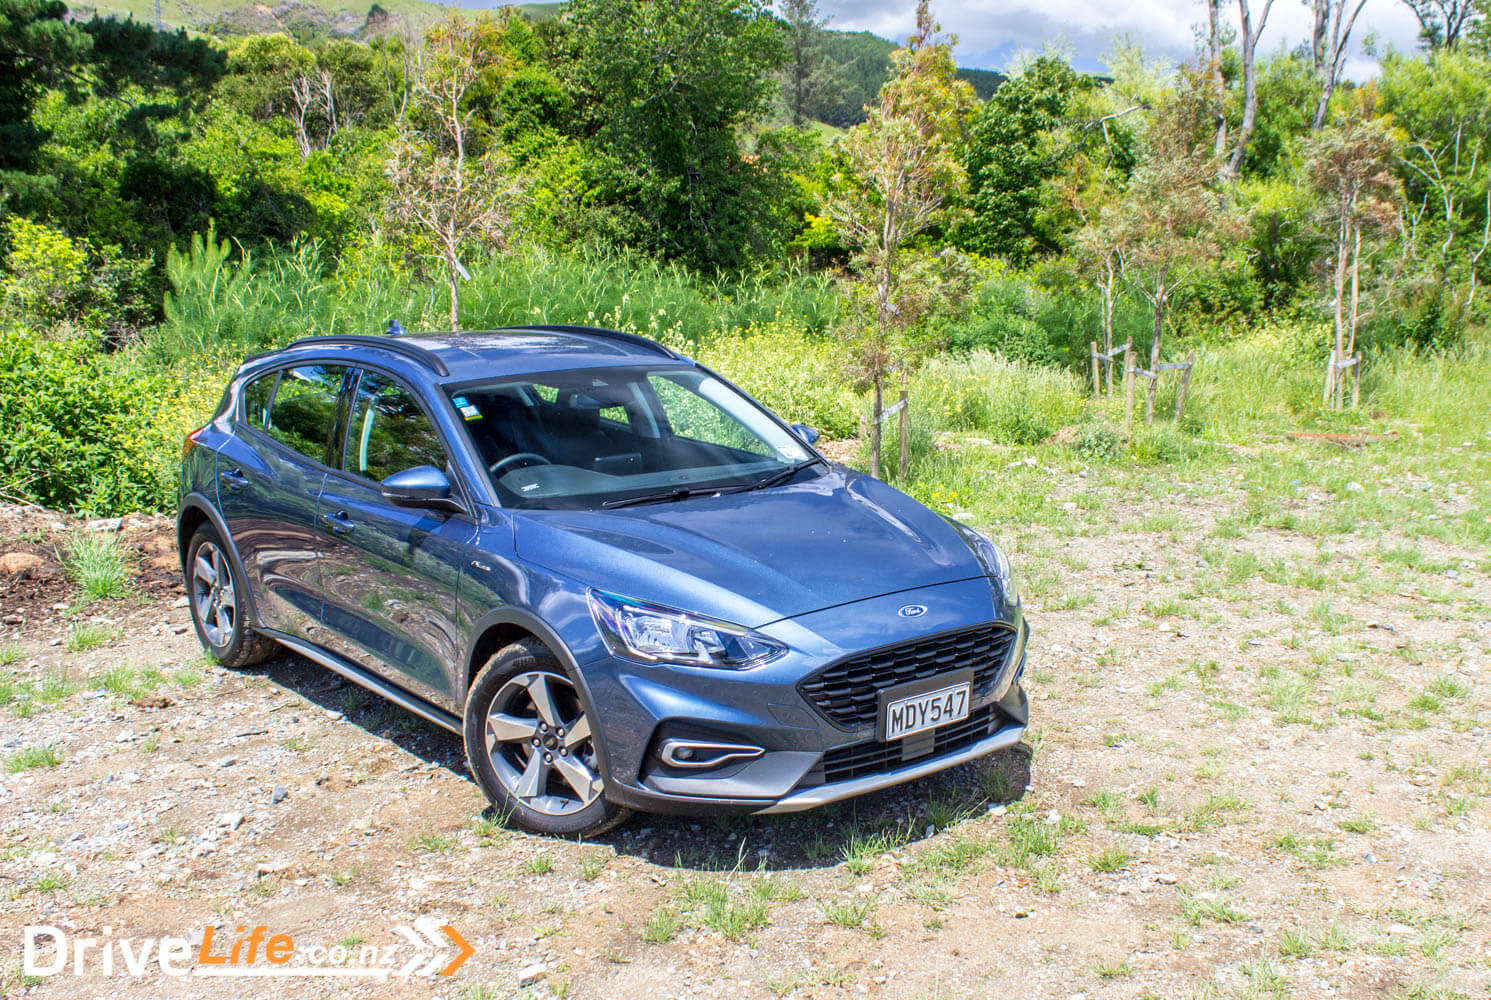 Ford Focus Active Turnier 1.5 Ecoboost specs, performance data